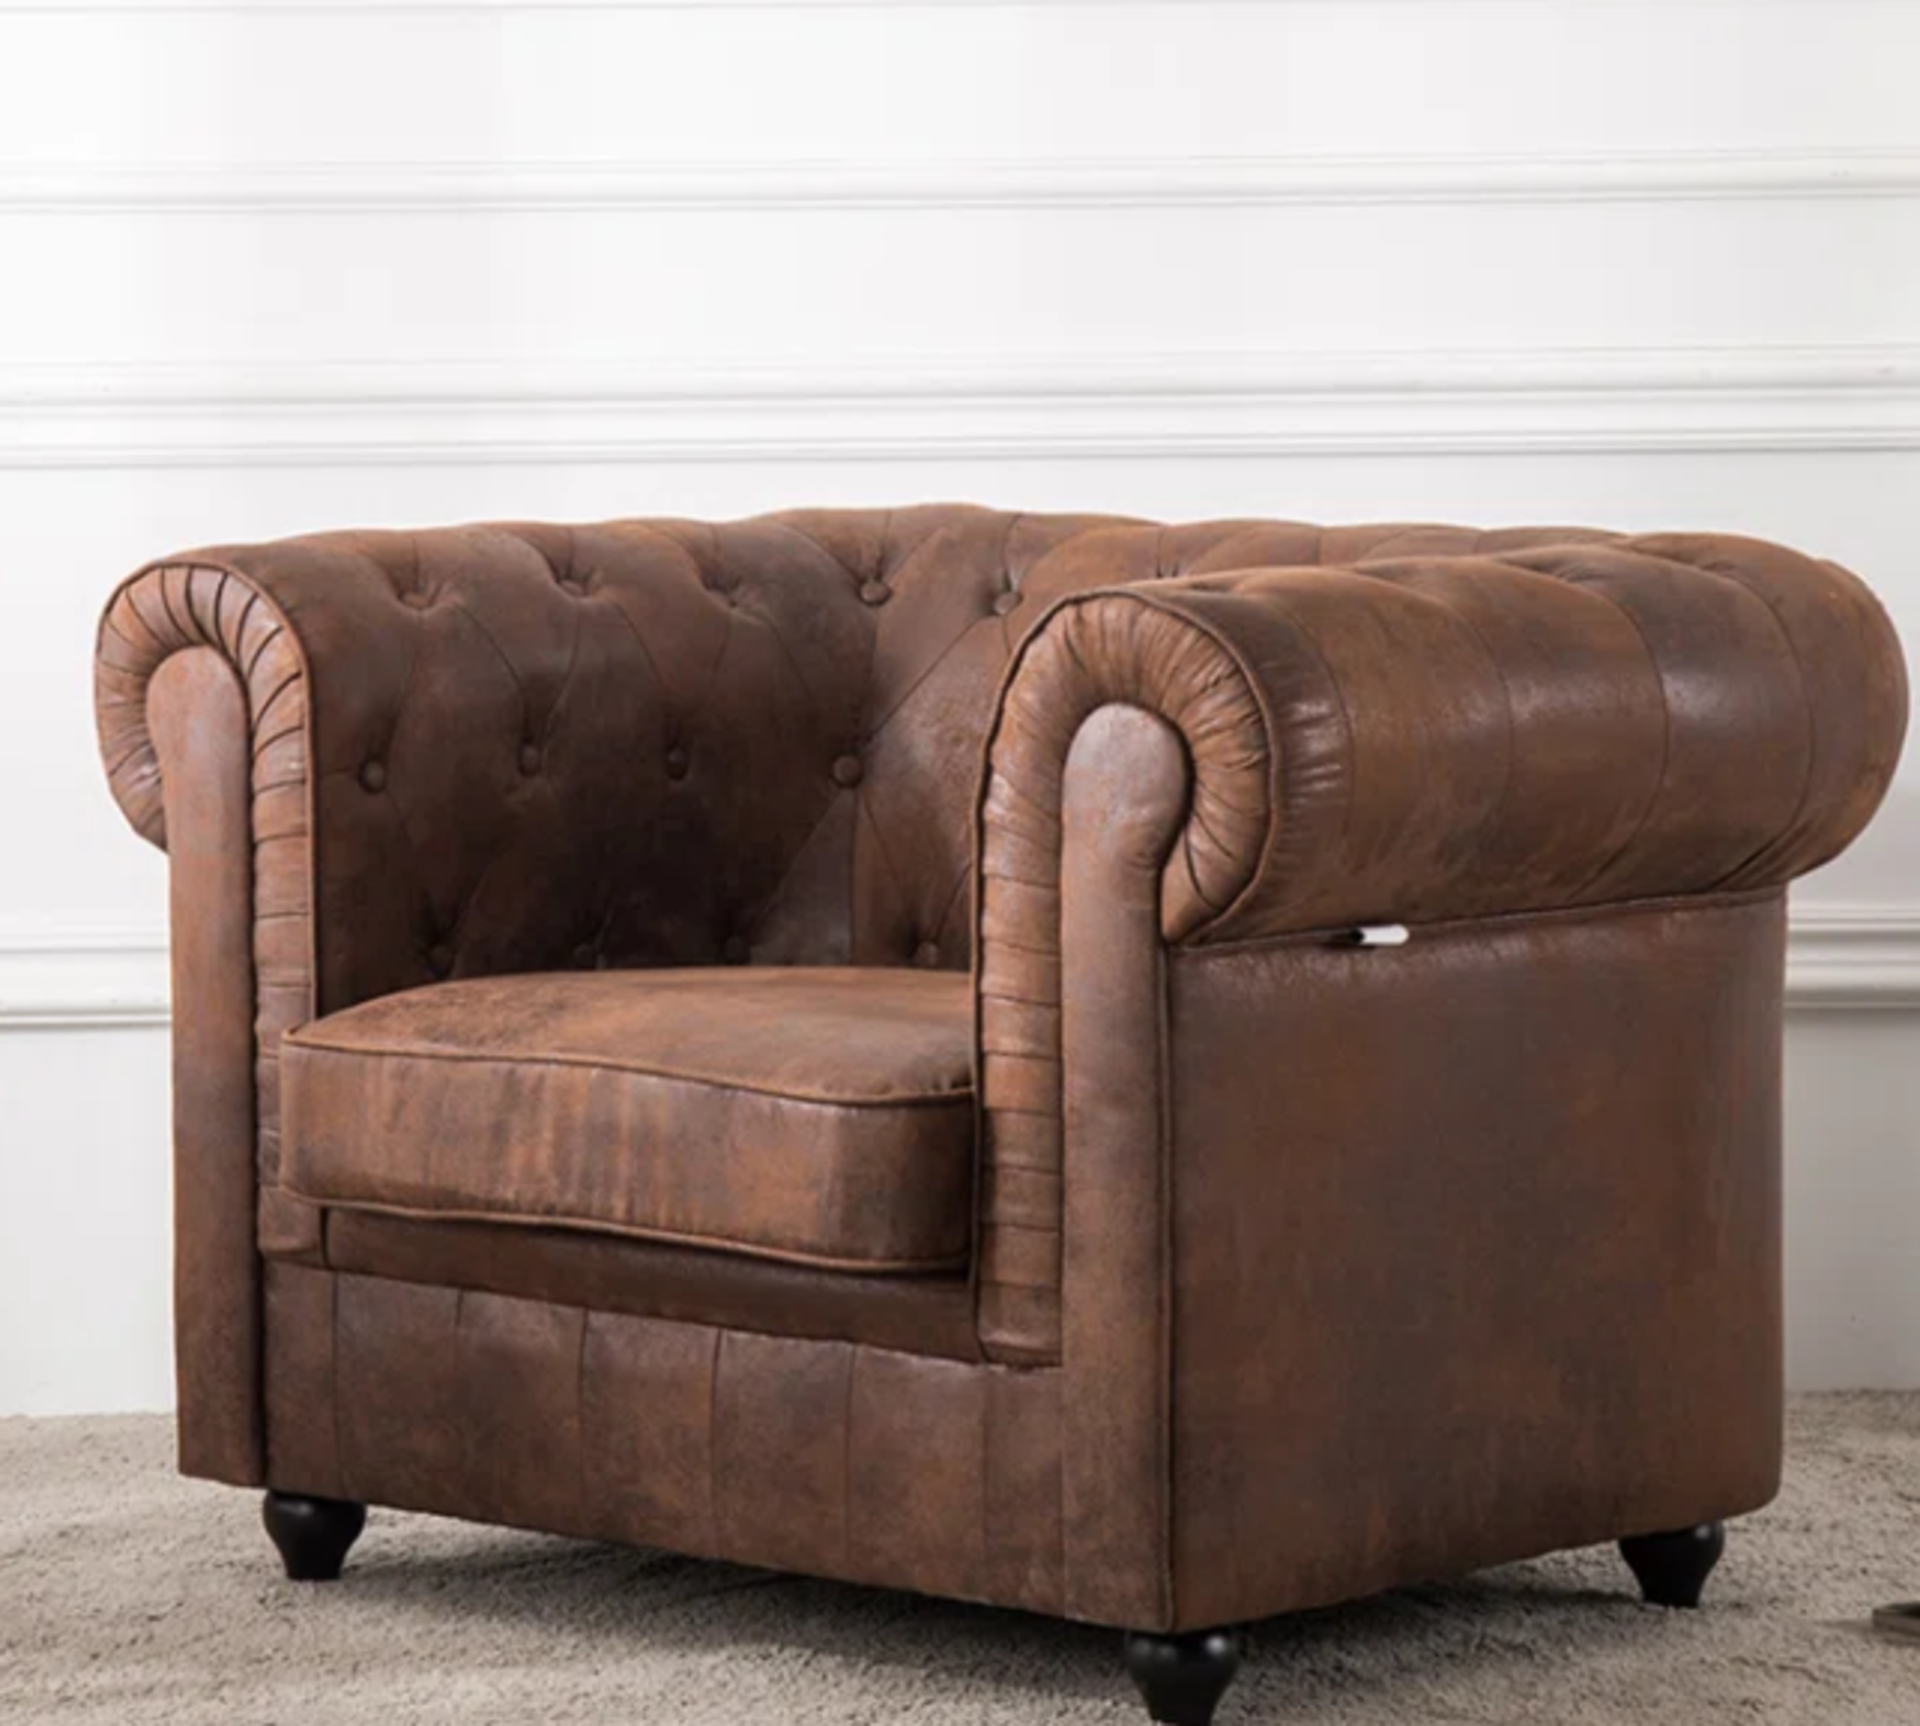 Three Posts Bivens Leather Chesterfield Chair. RRP £499.99. Instantly recognizable as a design